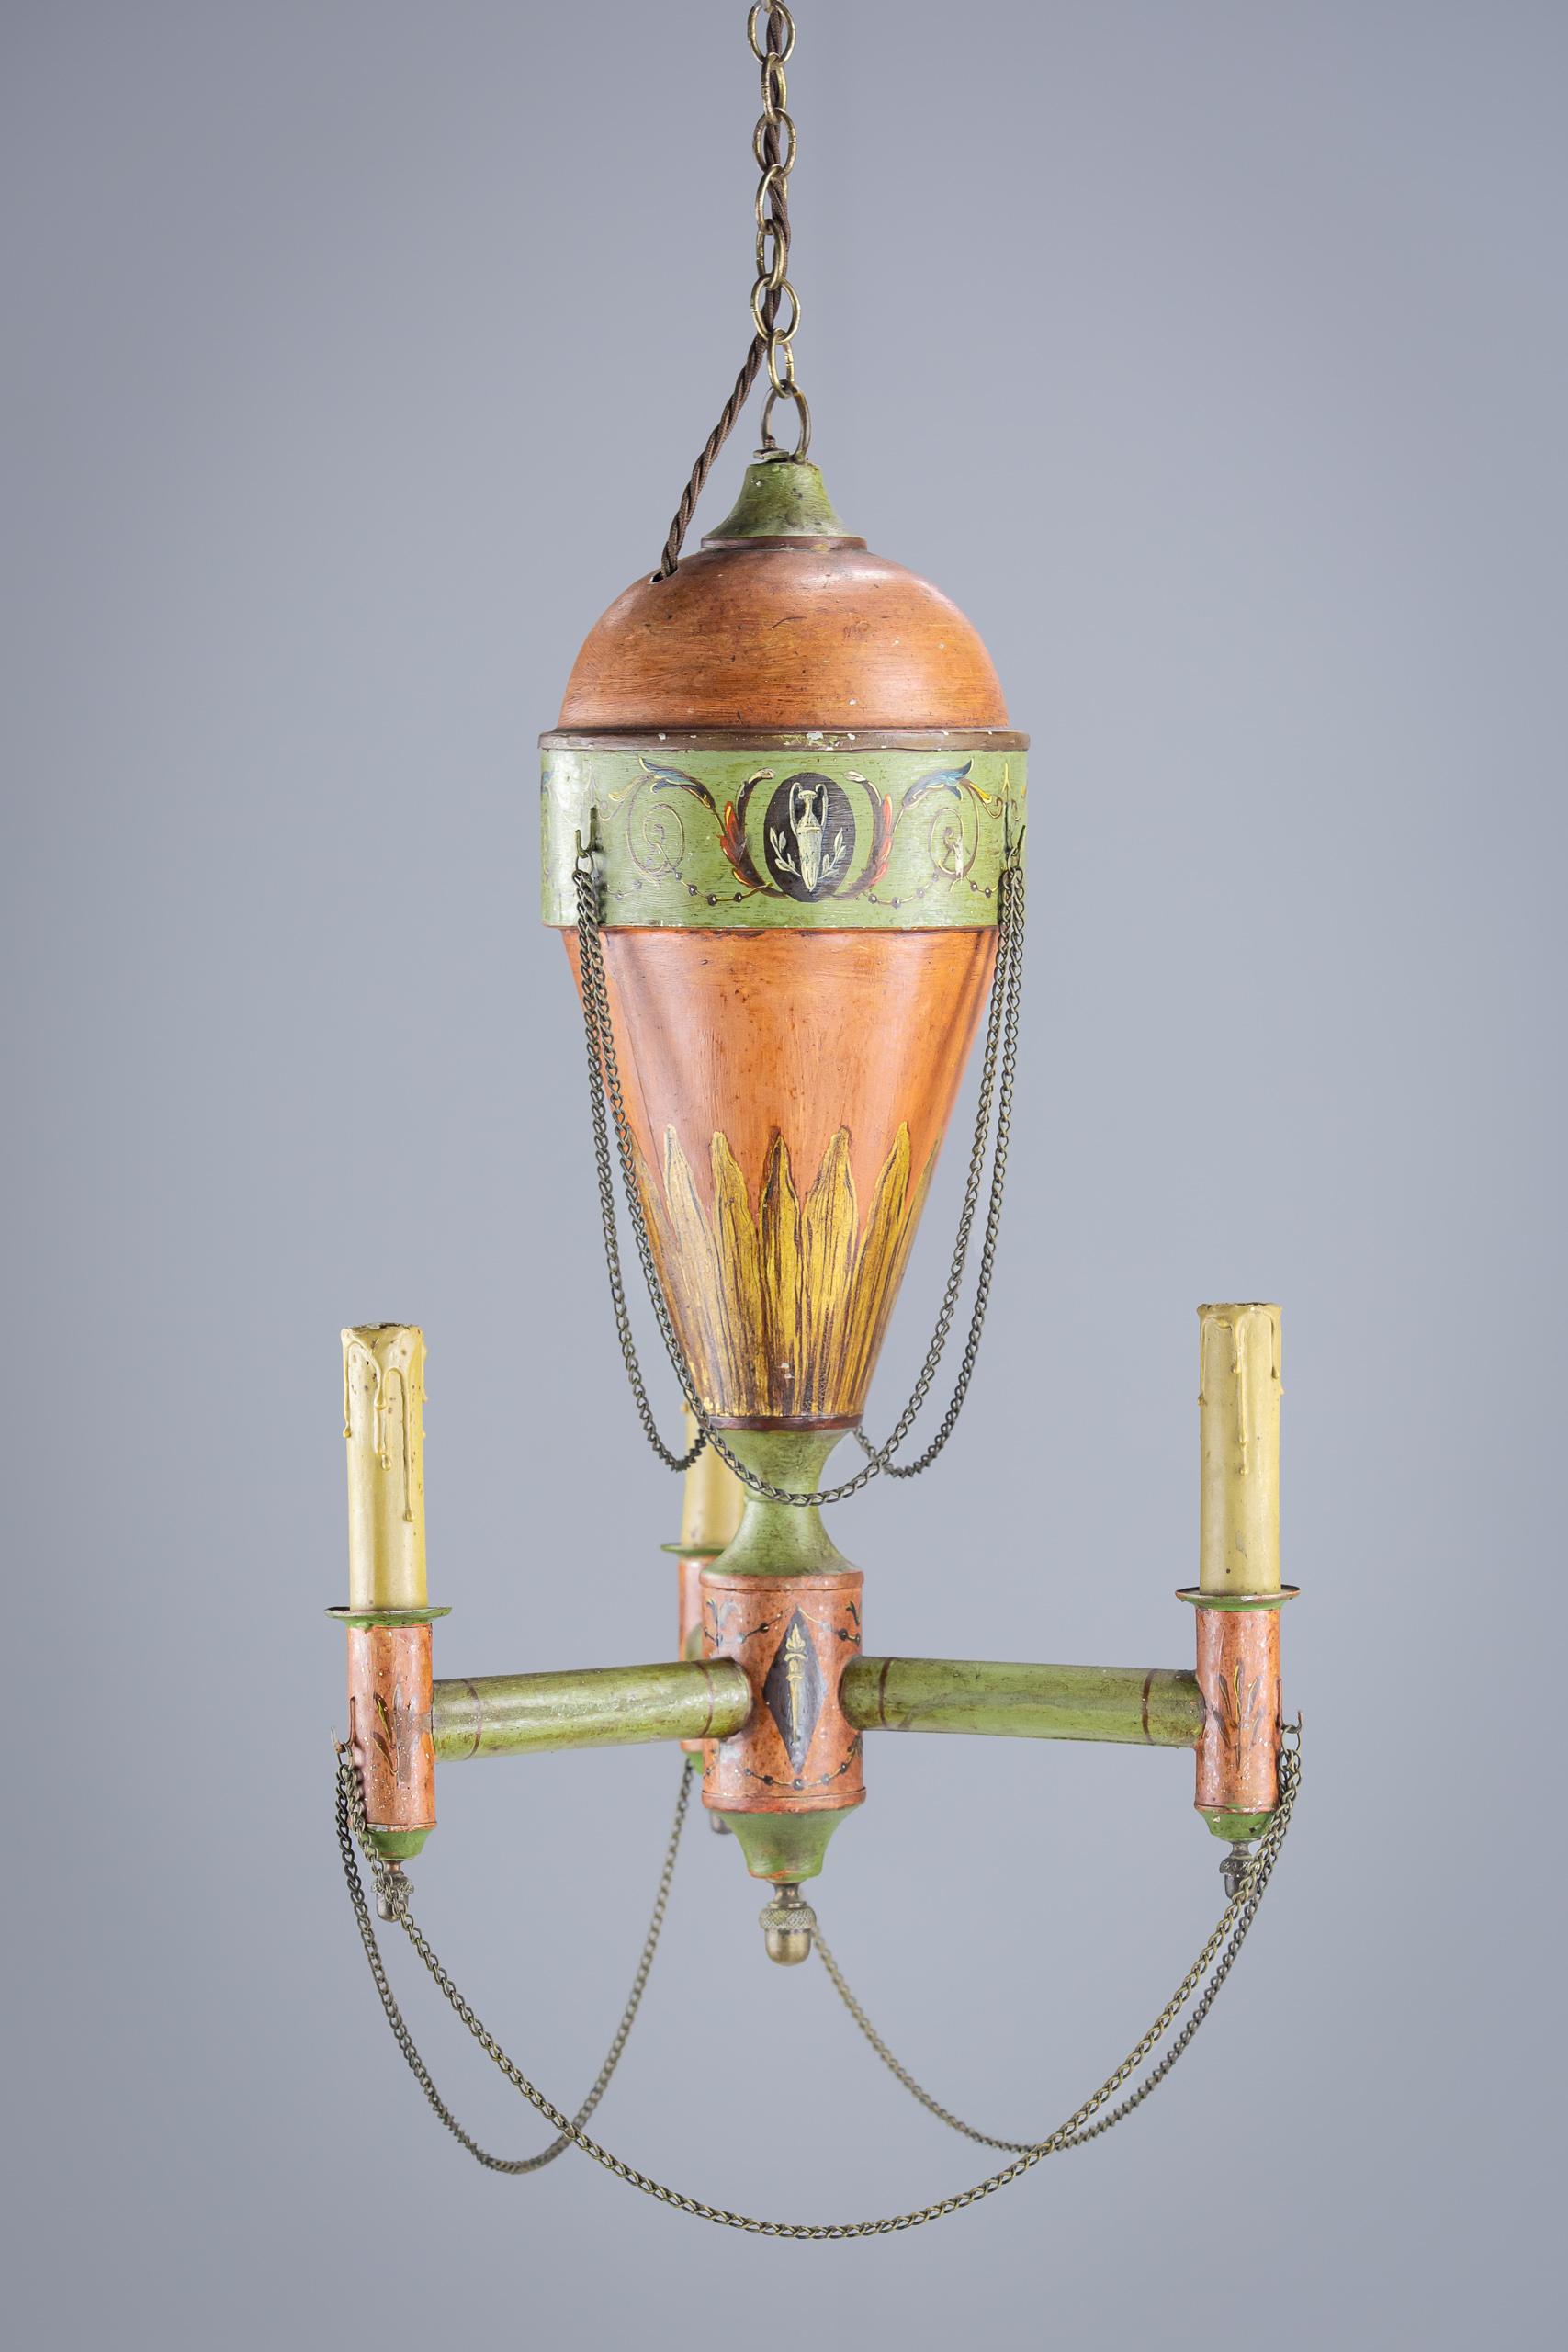 French Early 20th Century Painted Tole Hot Air Balloon Chandelier For Sale